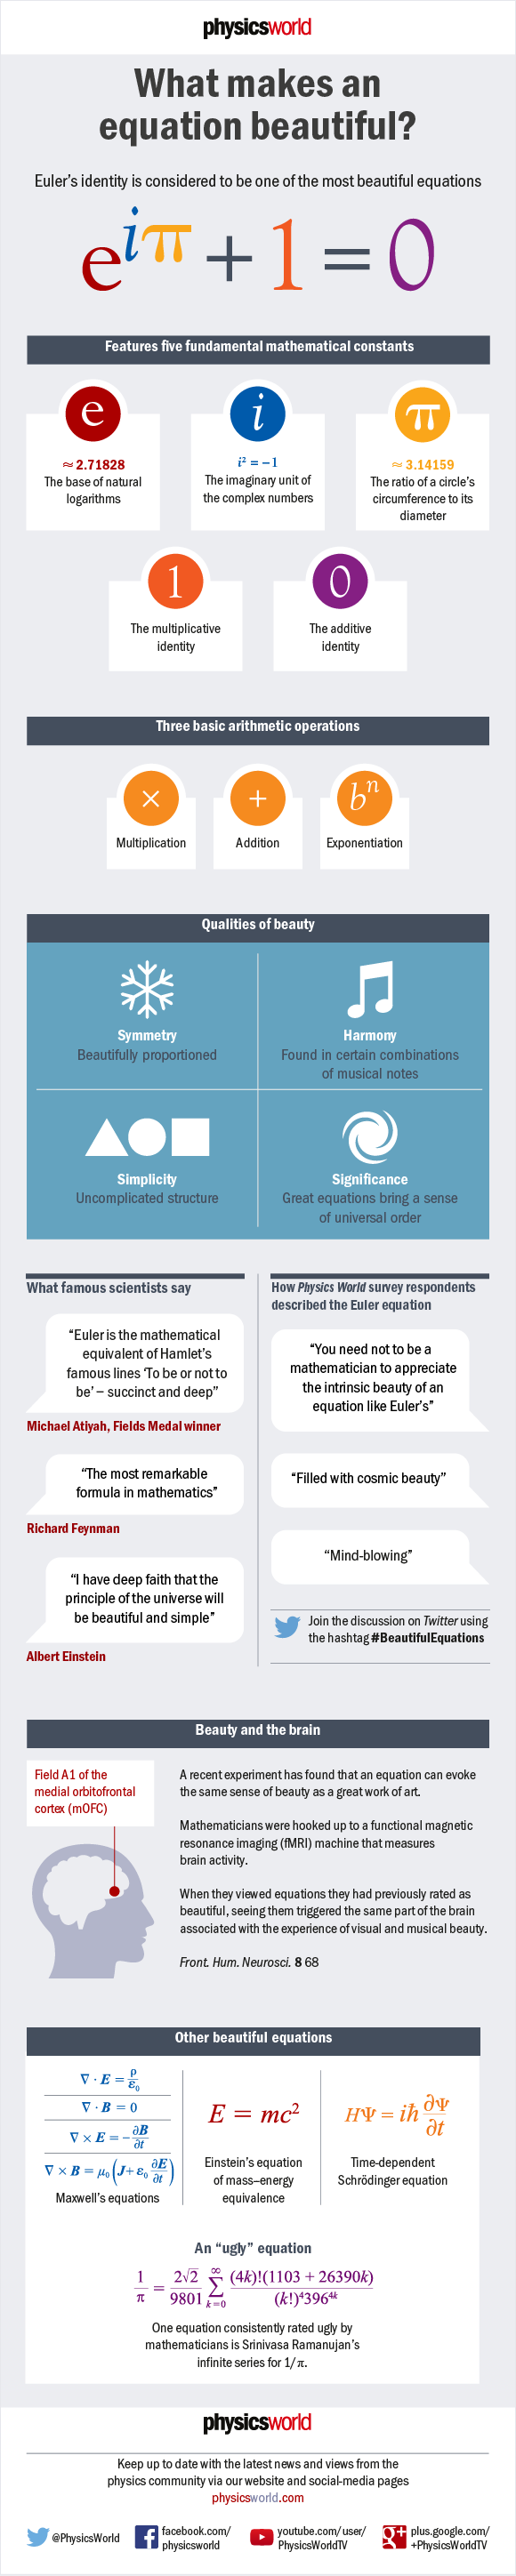 Infographic about beautiful equations